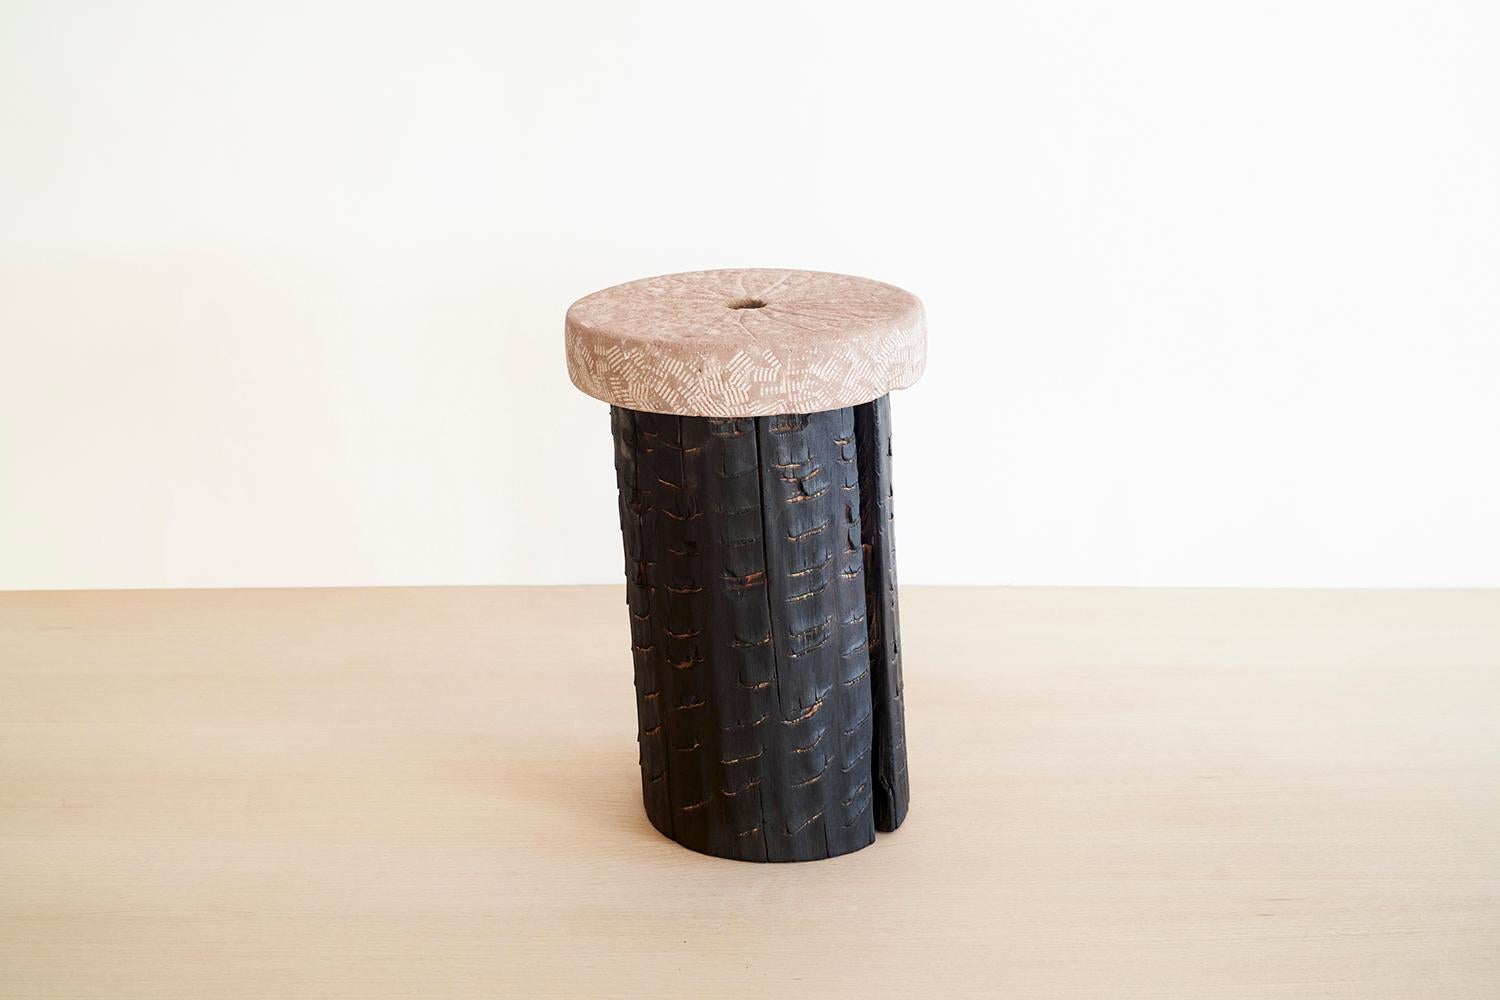 Art Brut Side Table by Jean-Baptiste Van Den Heede
Unique piece
Dimensions:  D 44 x H 28 cm
Materials: Hand-carved stone and Fire-Treated Wood.

Functional sculpture, side table from the ART BRUT collection. 

Jean-Baptiste Van den Heede defines